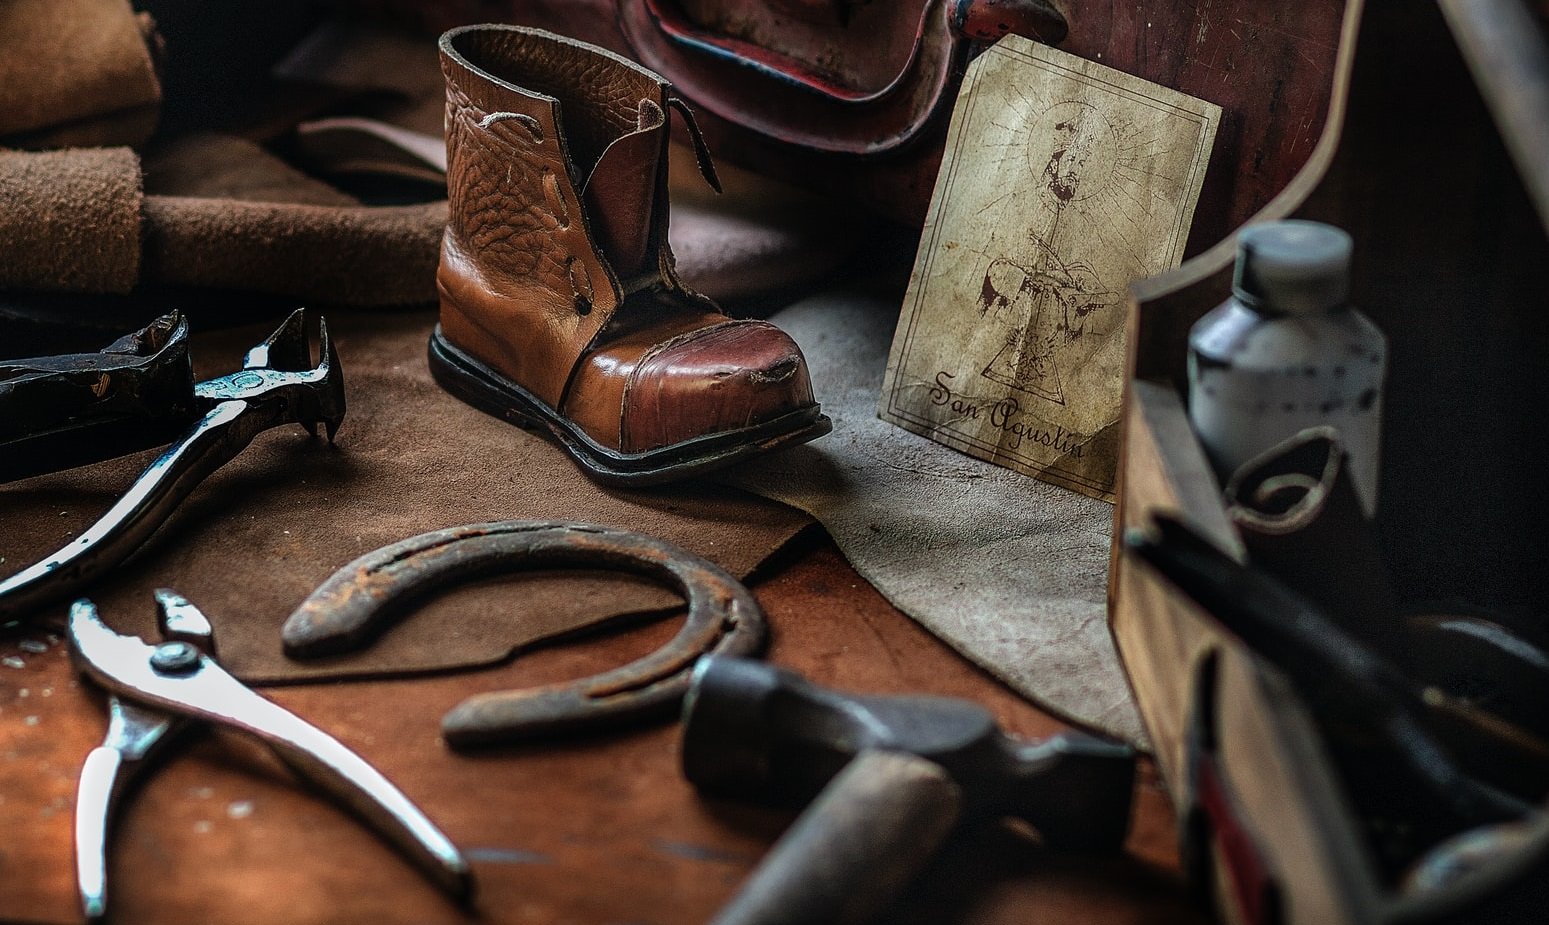 The man was a shoemaker, so she decided to bring him some shoes she was thinking of donating. | Source: Unsplash